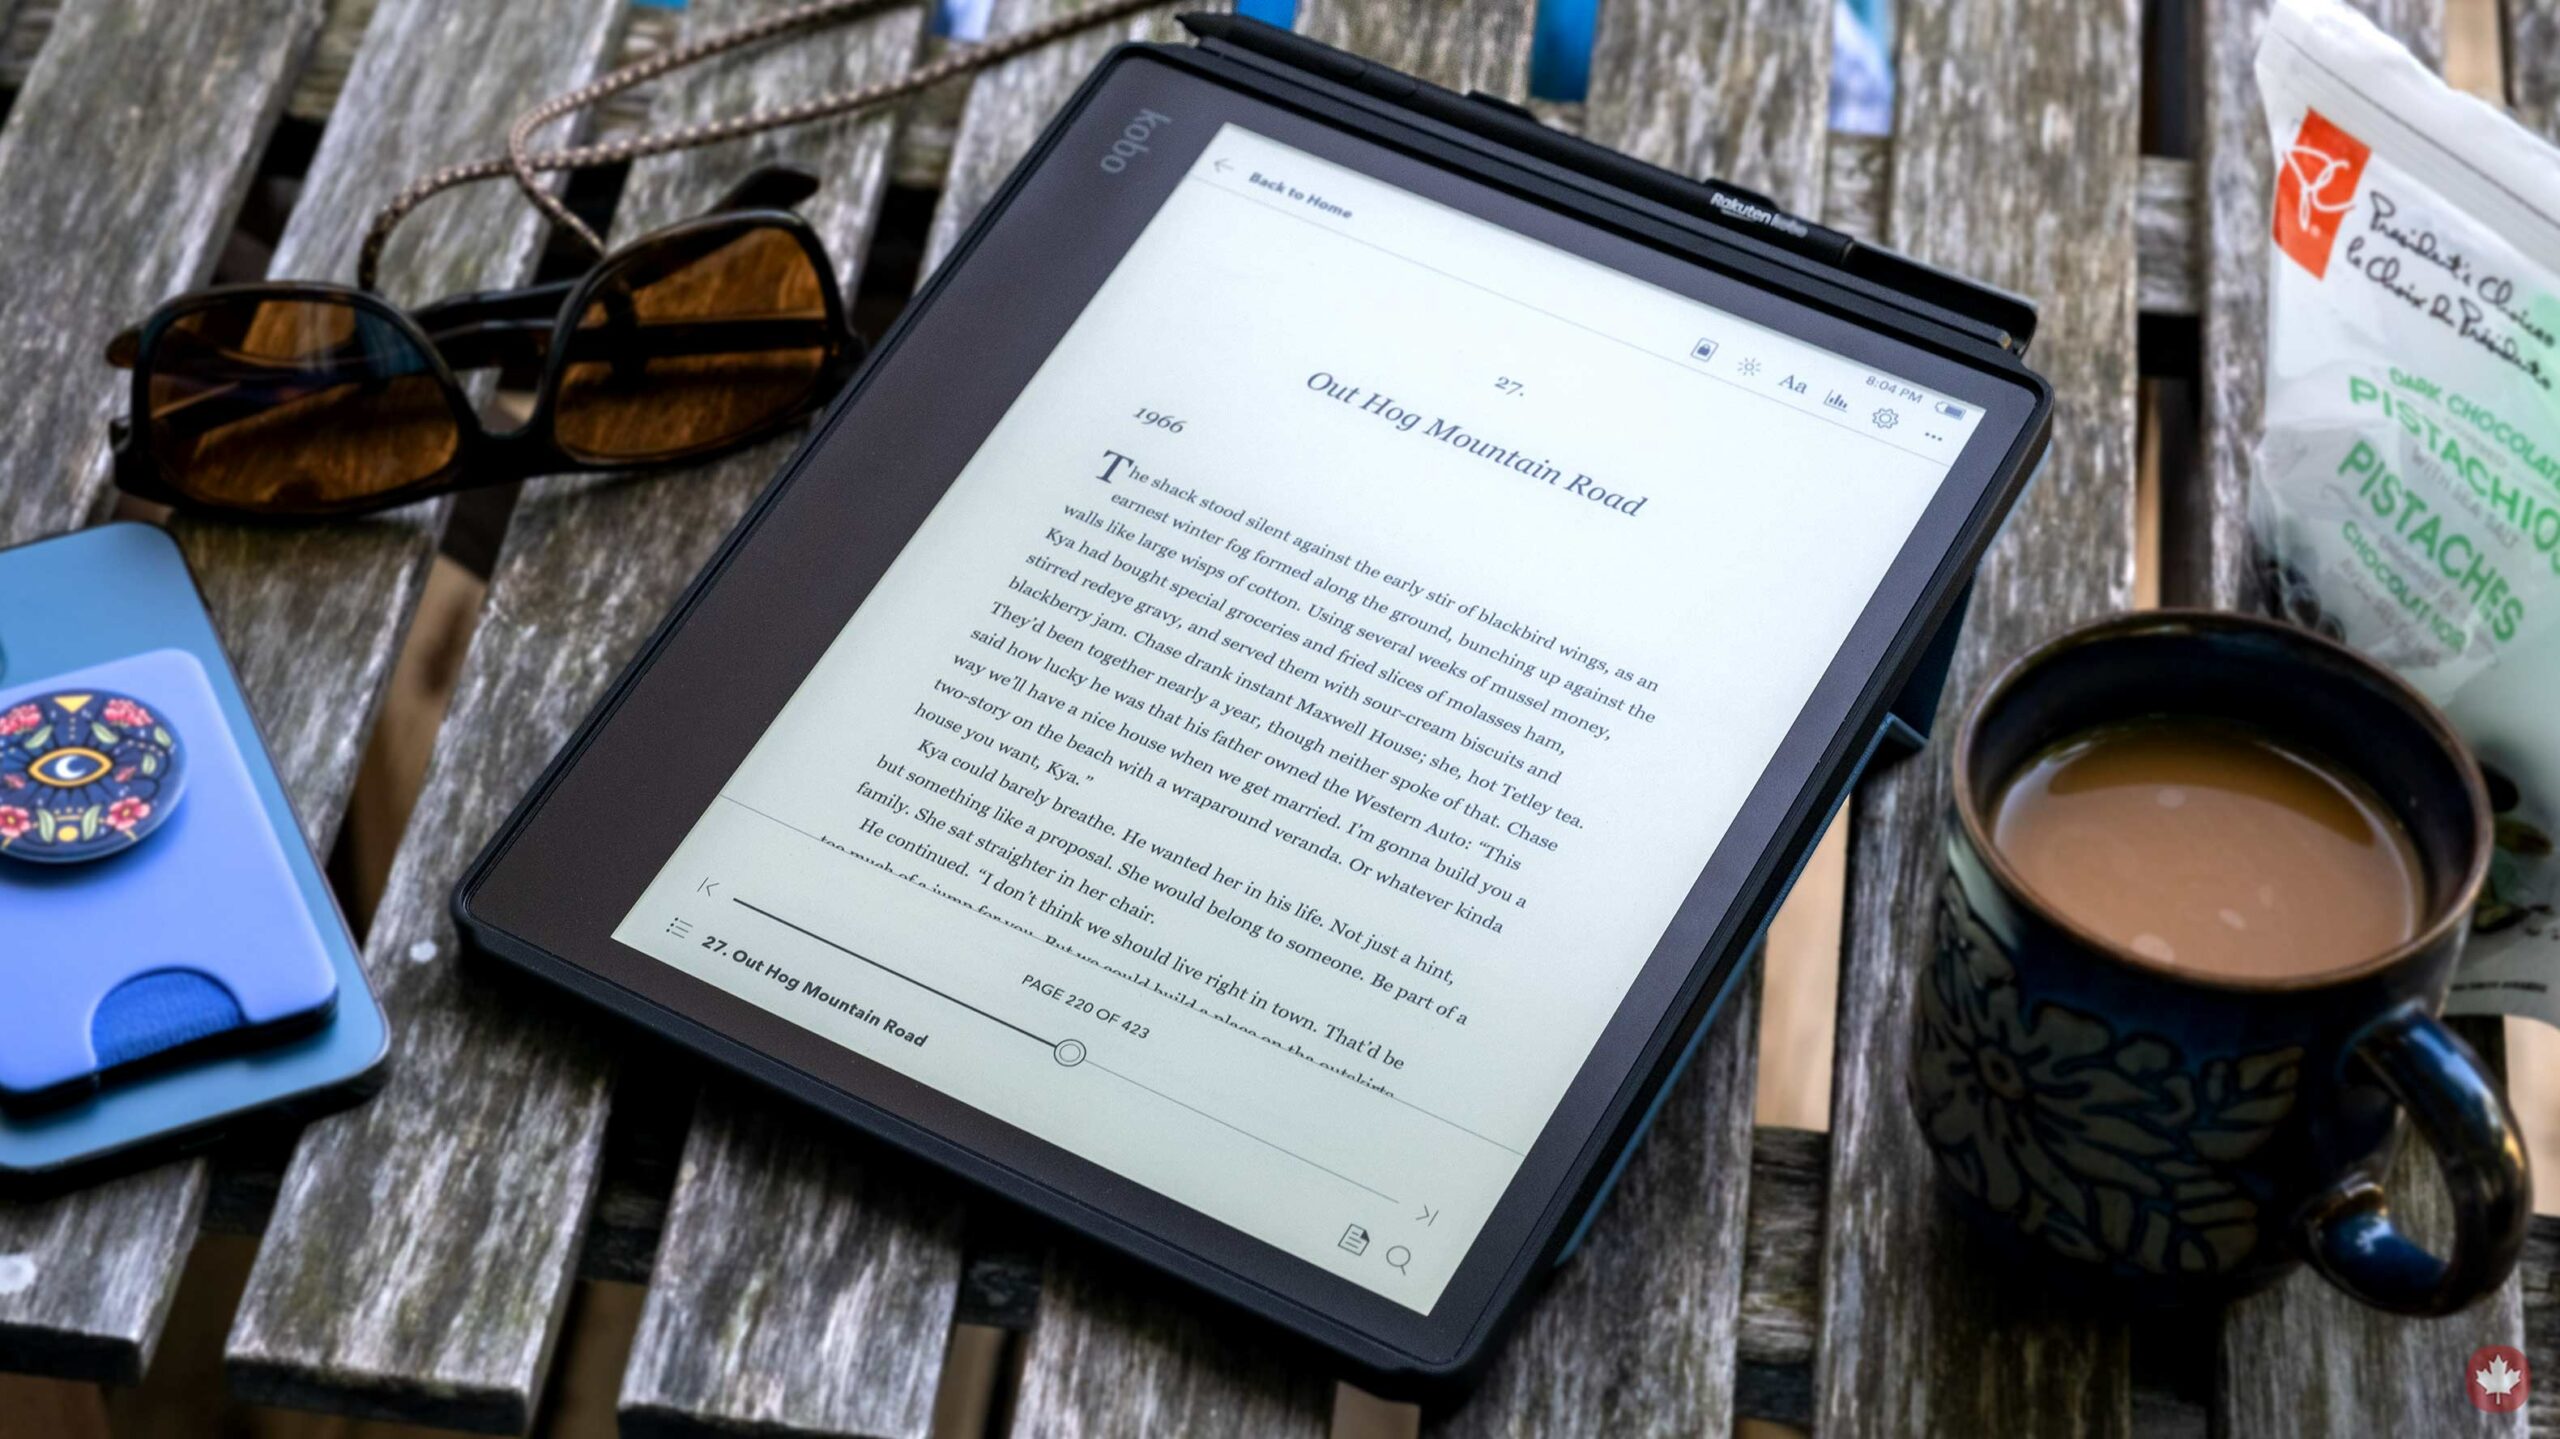 Why Would You Buy the Kobo Elipsa?